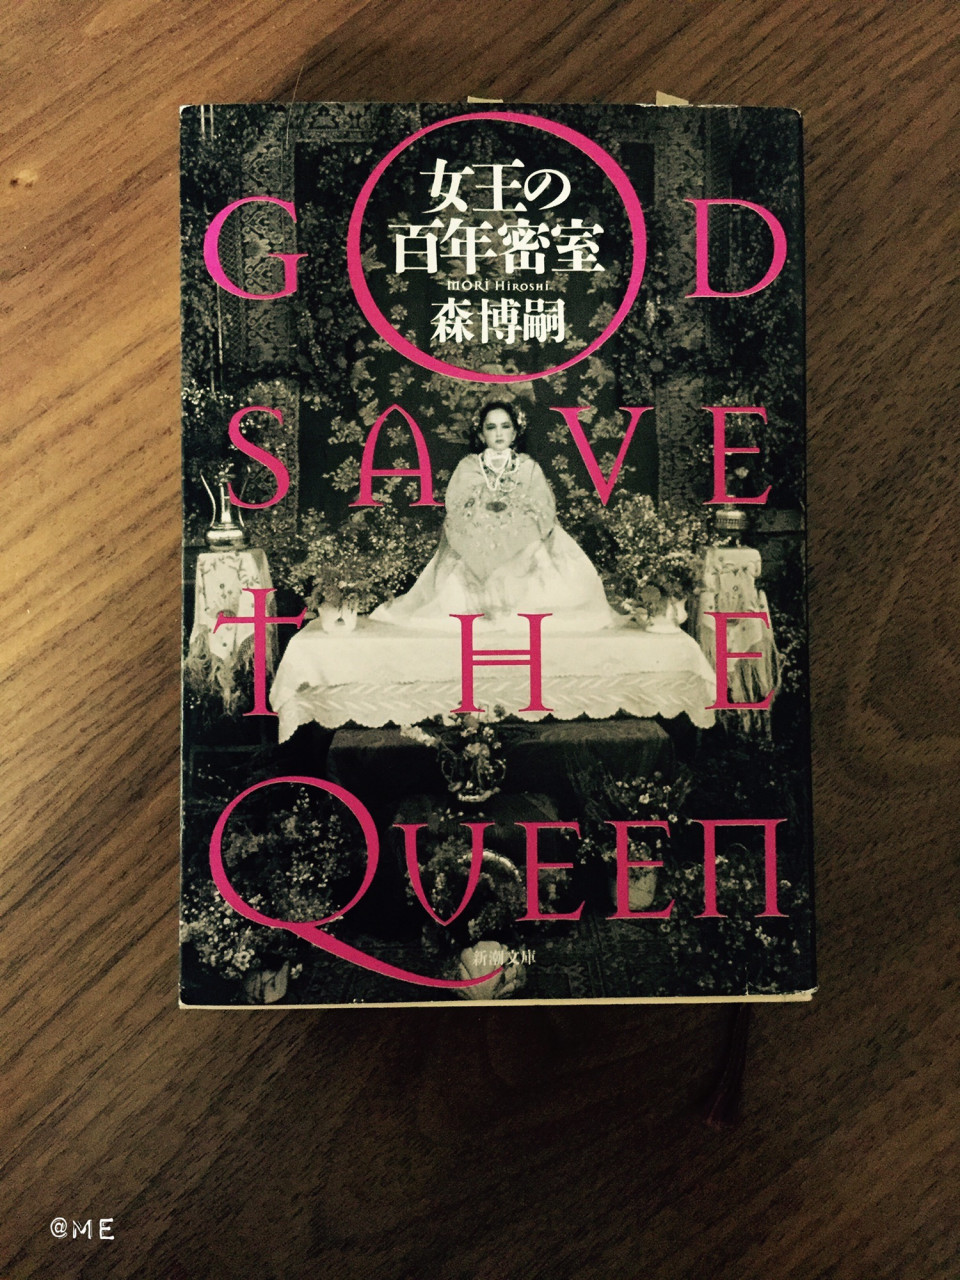 God Save The Queen 女王の百年密室 虹と星が見える丘